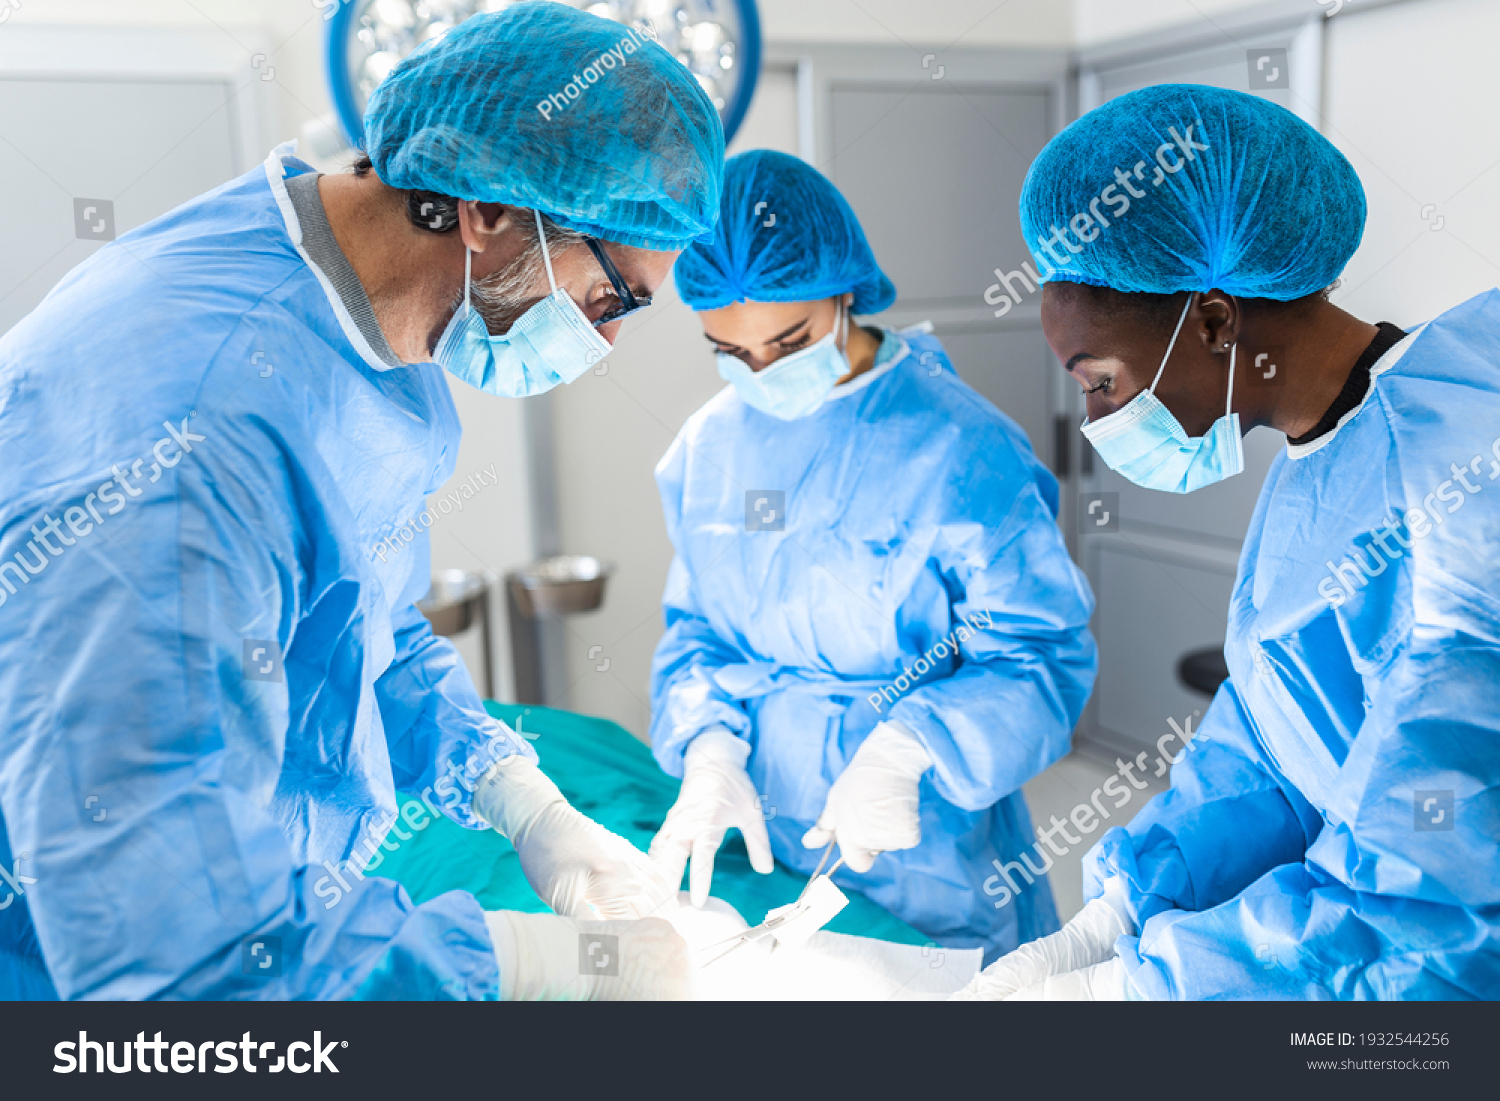 Group of surgeons doing surgery in hospital operating theater. Medical team doing critical operation. Group of surgeons in operating room with surgery equipment. Modern medical background #1932544256